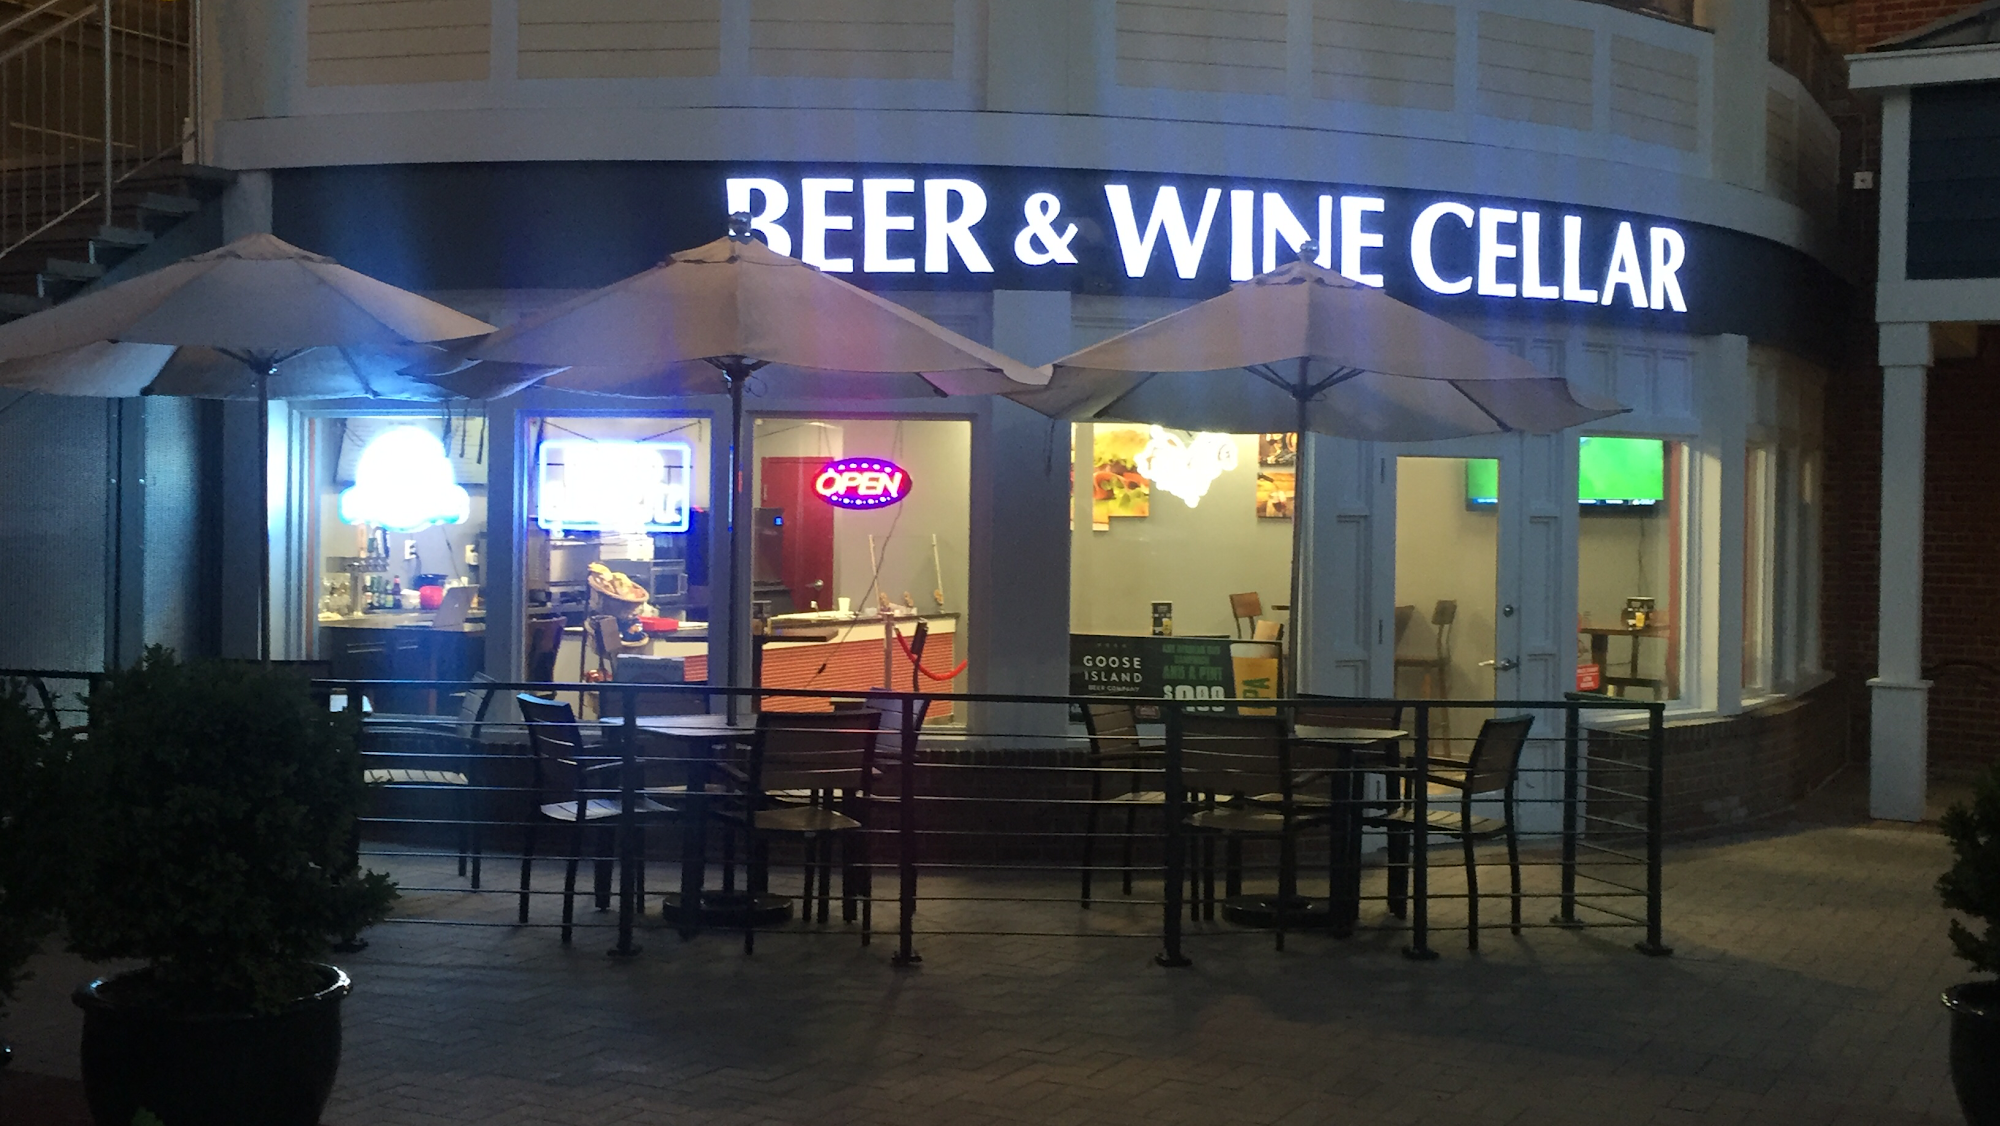 The Beer and Wine Cellar